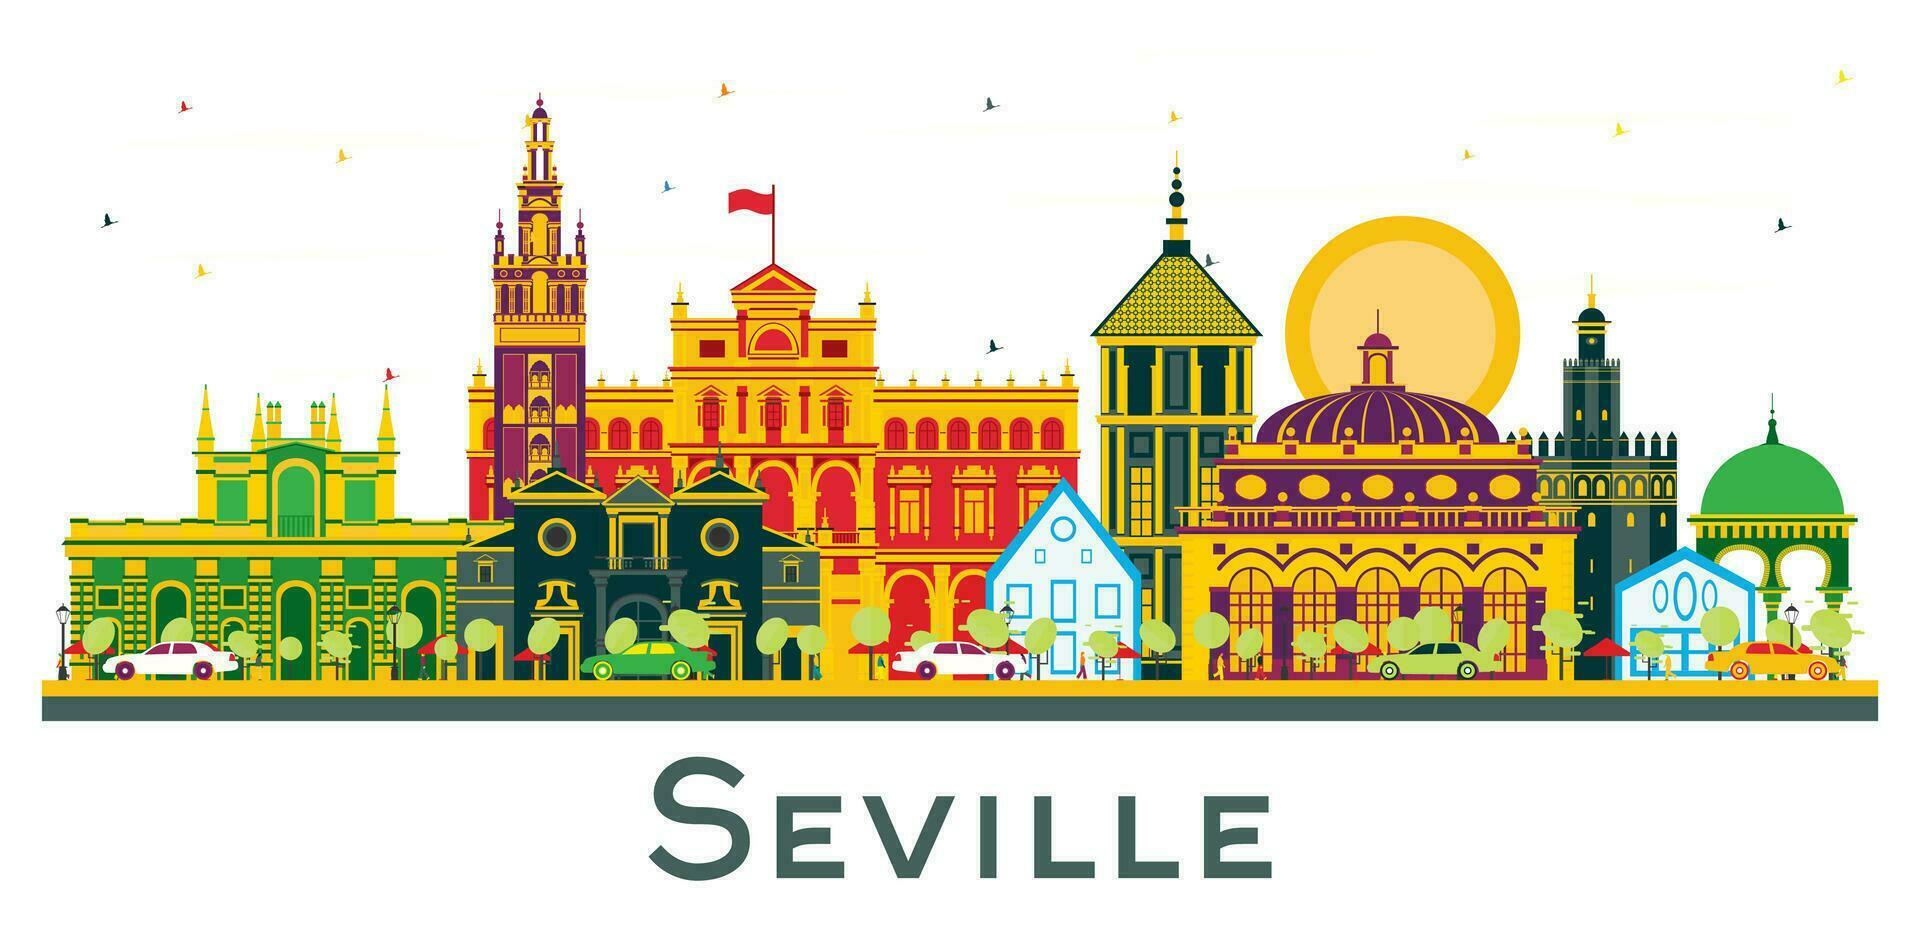 Seville Spain City Skyline with Color Buildings Isolated on White. vector